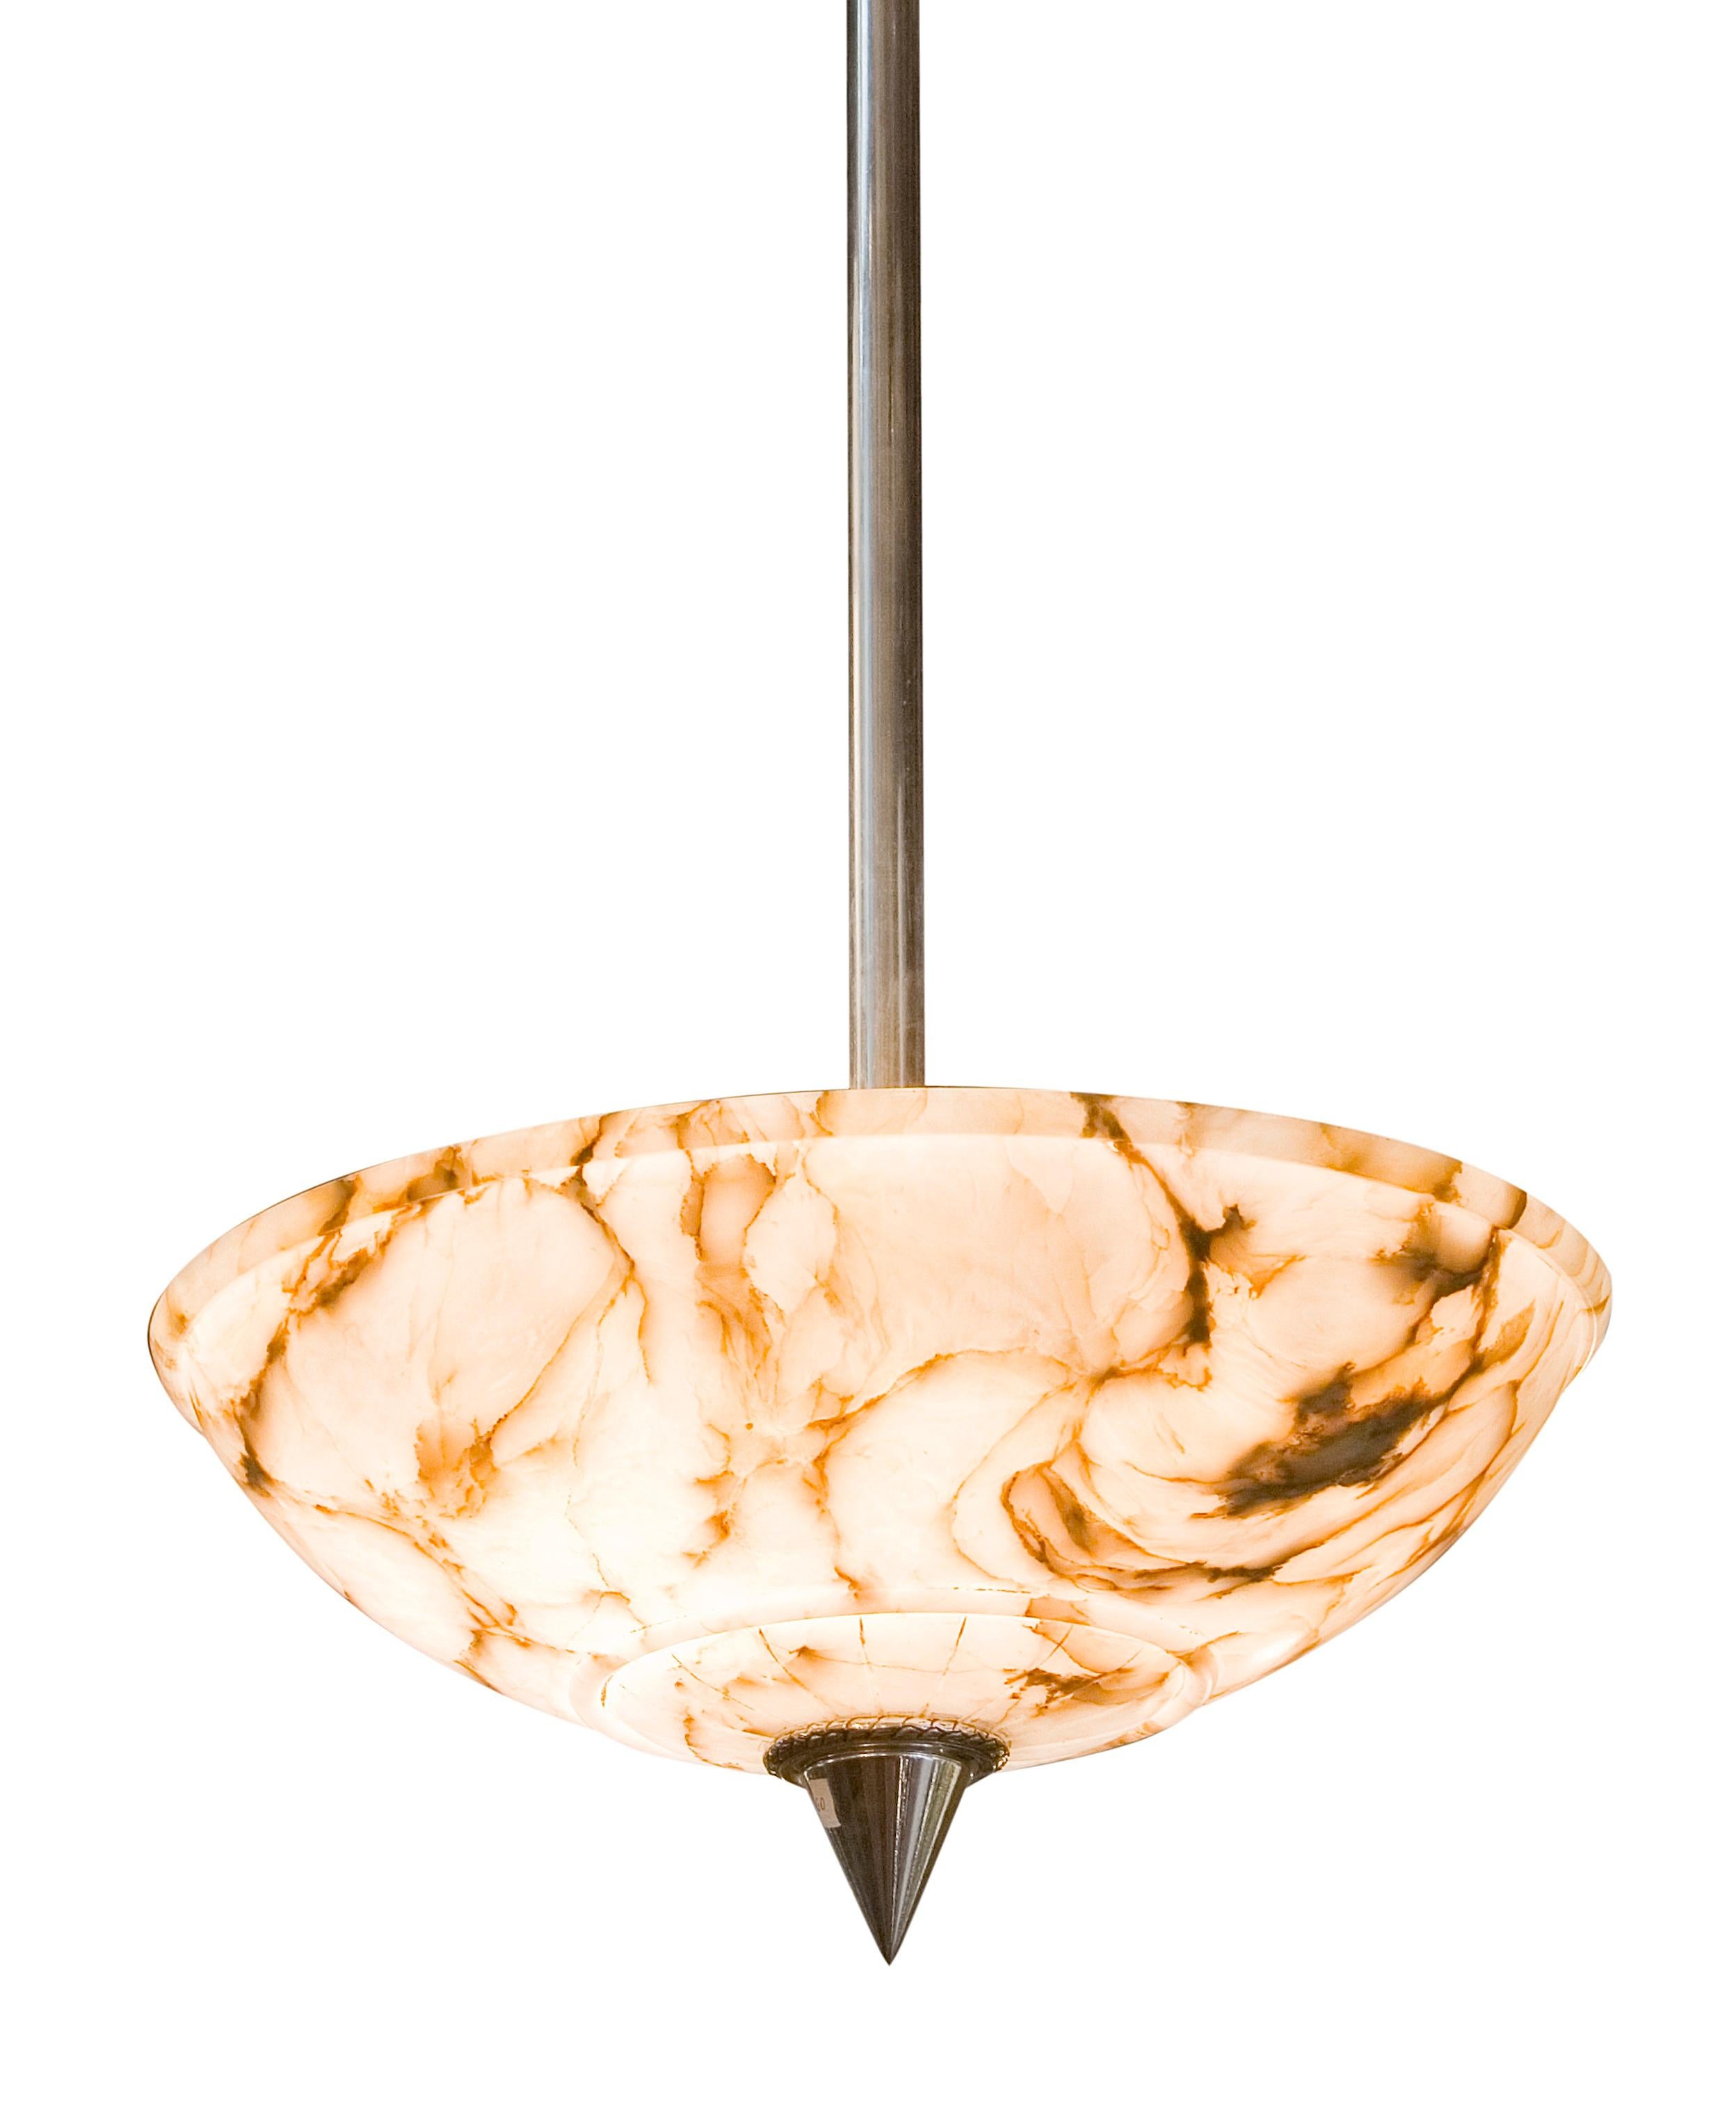 Amazing hanging lamps in alabaster 60 cm diametro x 140 high cm.

if you have problems to the hight, we can cut the barral, at the indicated height (free of charge).
To take care of your property and the lives of our customers, the new wiring has